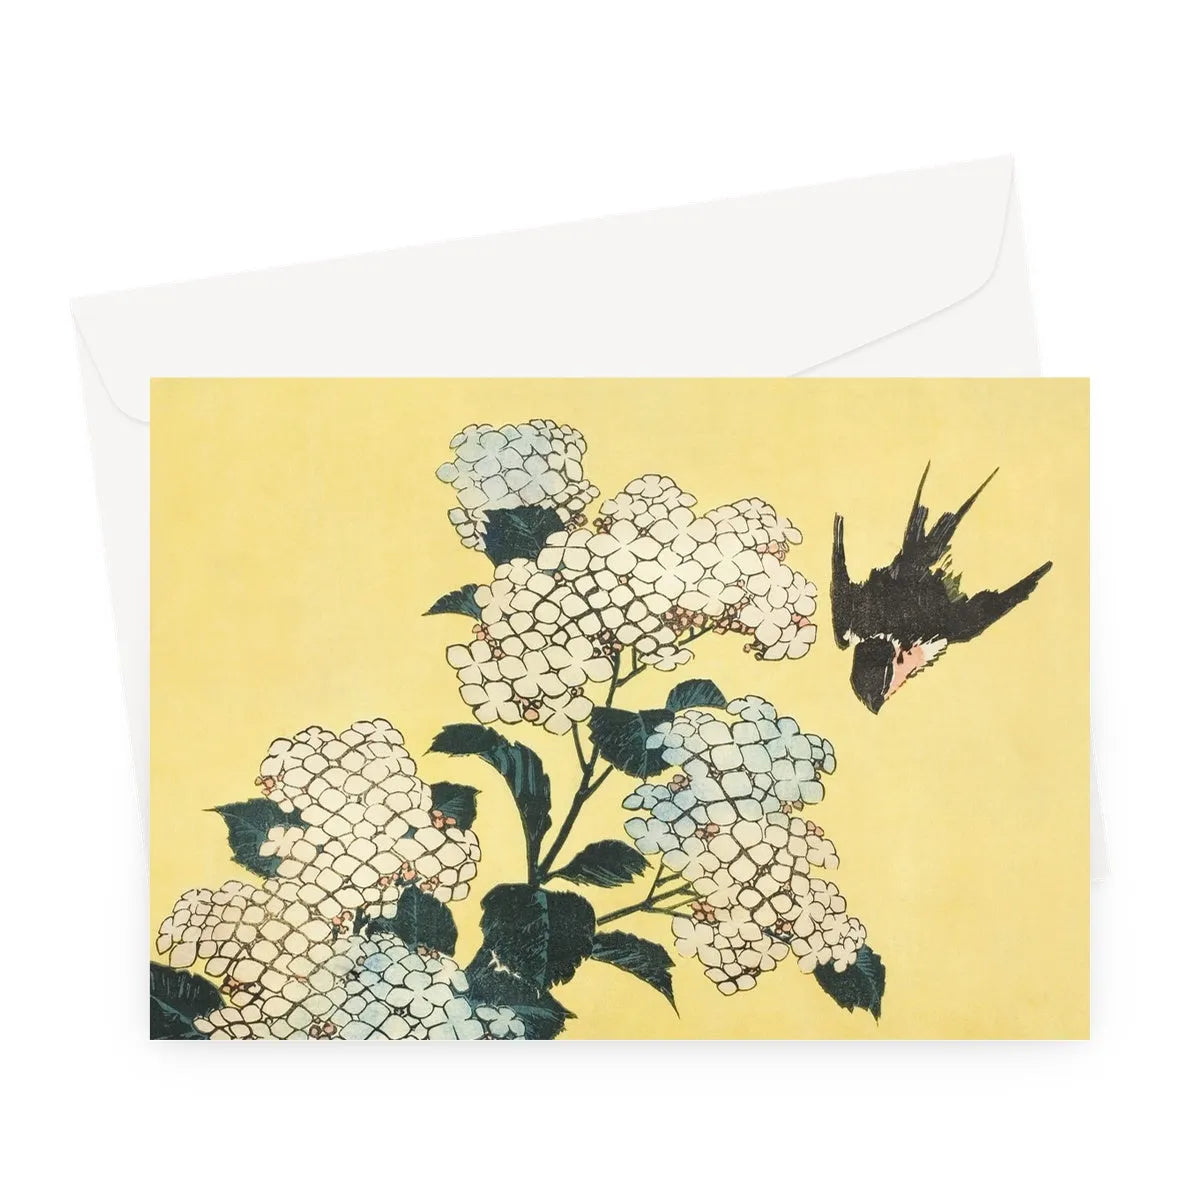 Hydrangea And Swallow By Hokusai Greeting Card - A5 Landscape / 1 Card - Notebooks & Notepads - Aesthetic Art